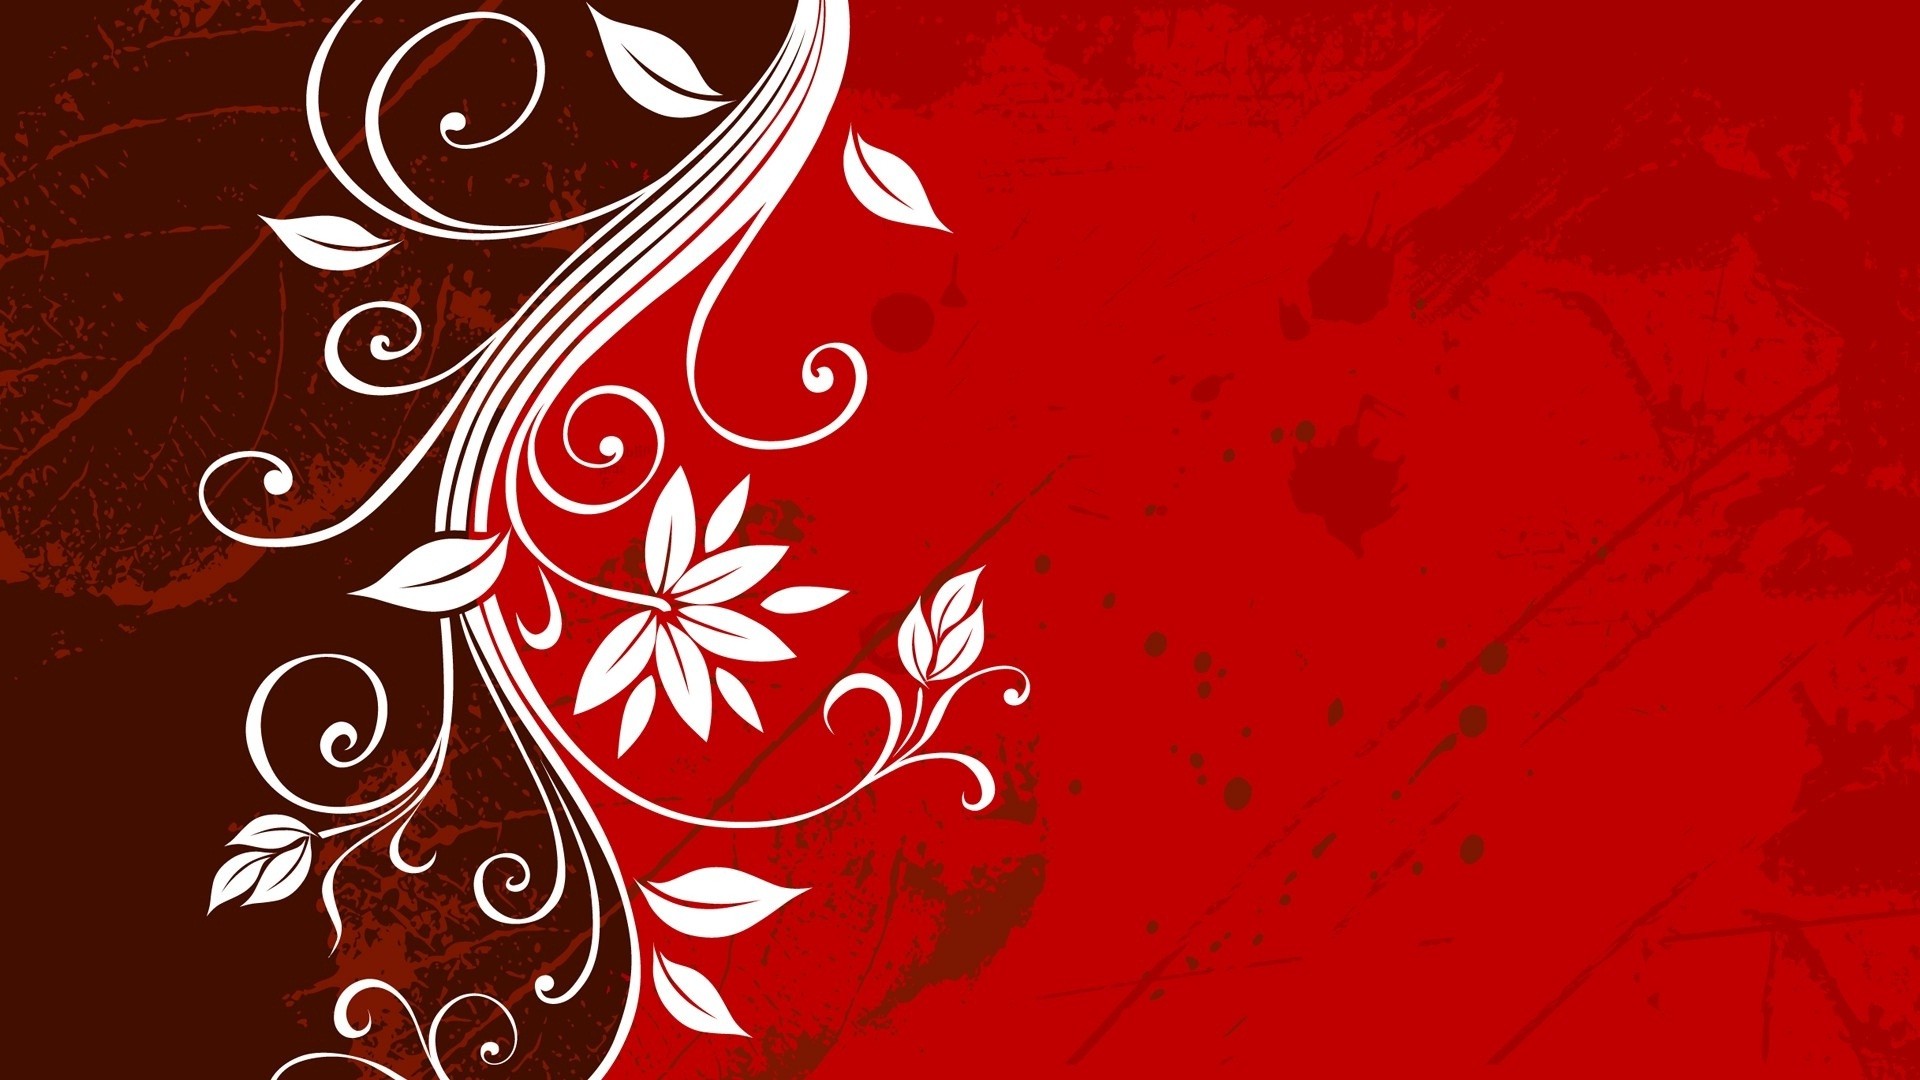 1920x1080 Awesome flowery design dark red background wallpapers